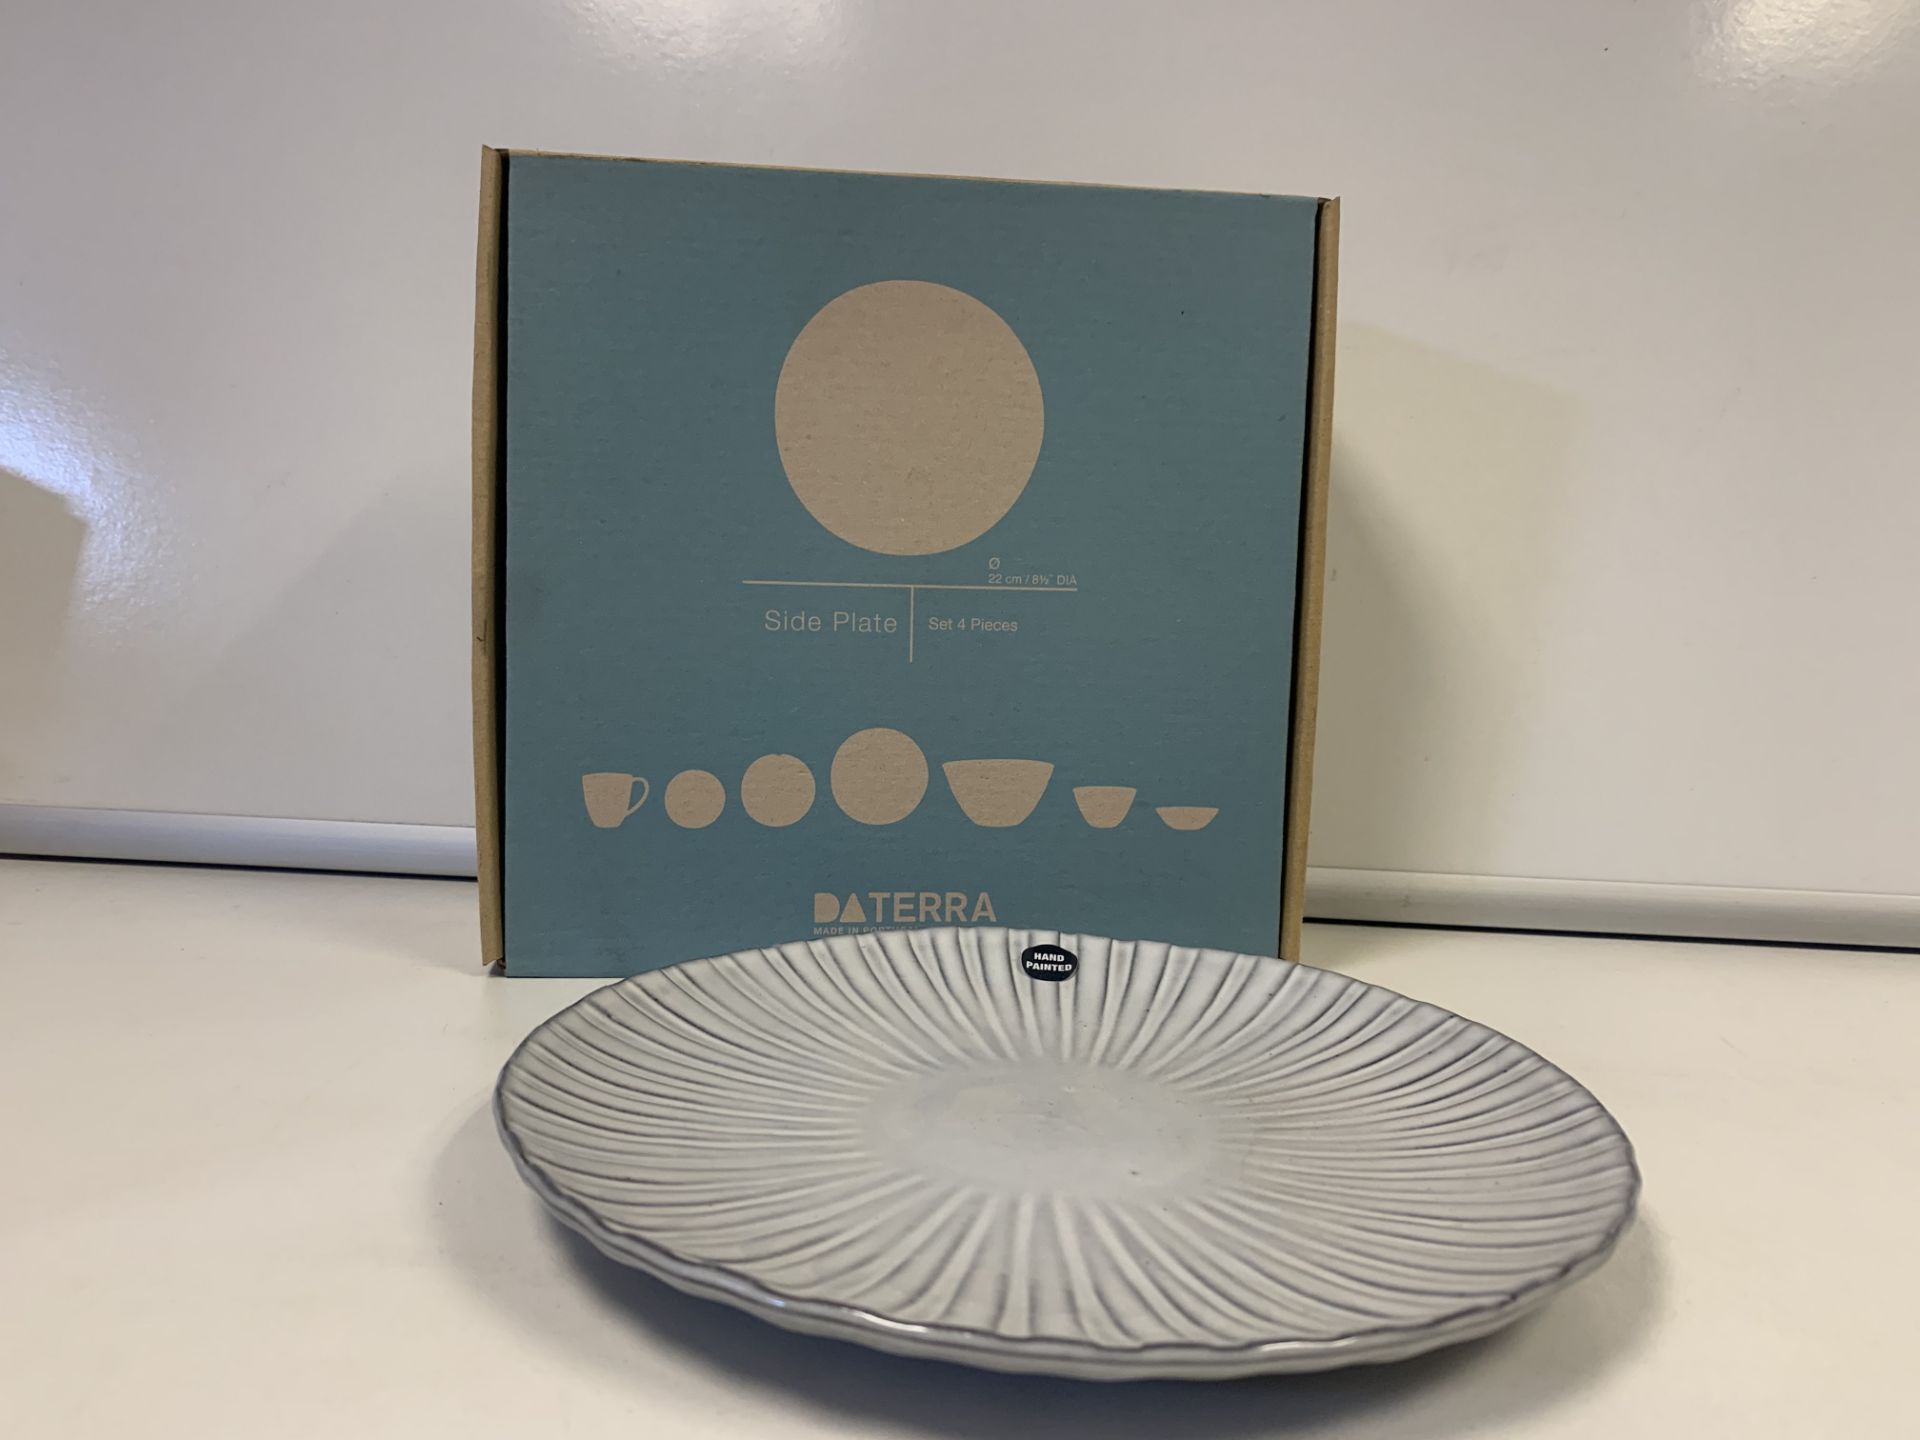 6 X BRAND NEW PACKS OF 4 RETAIL BOXED DA TERRA DOURO LAGRIMA SIDE PLATES RRP £70 PER PACK (HAND